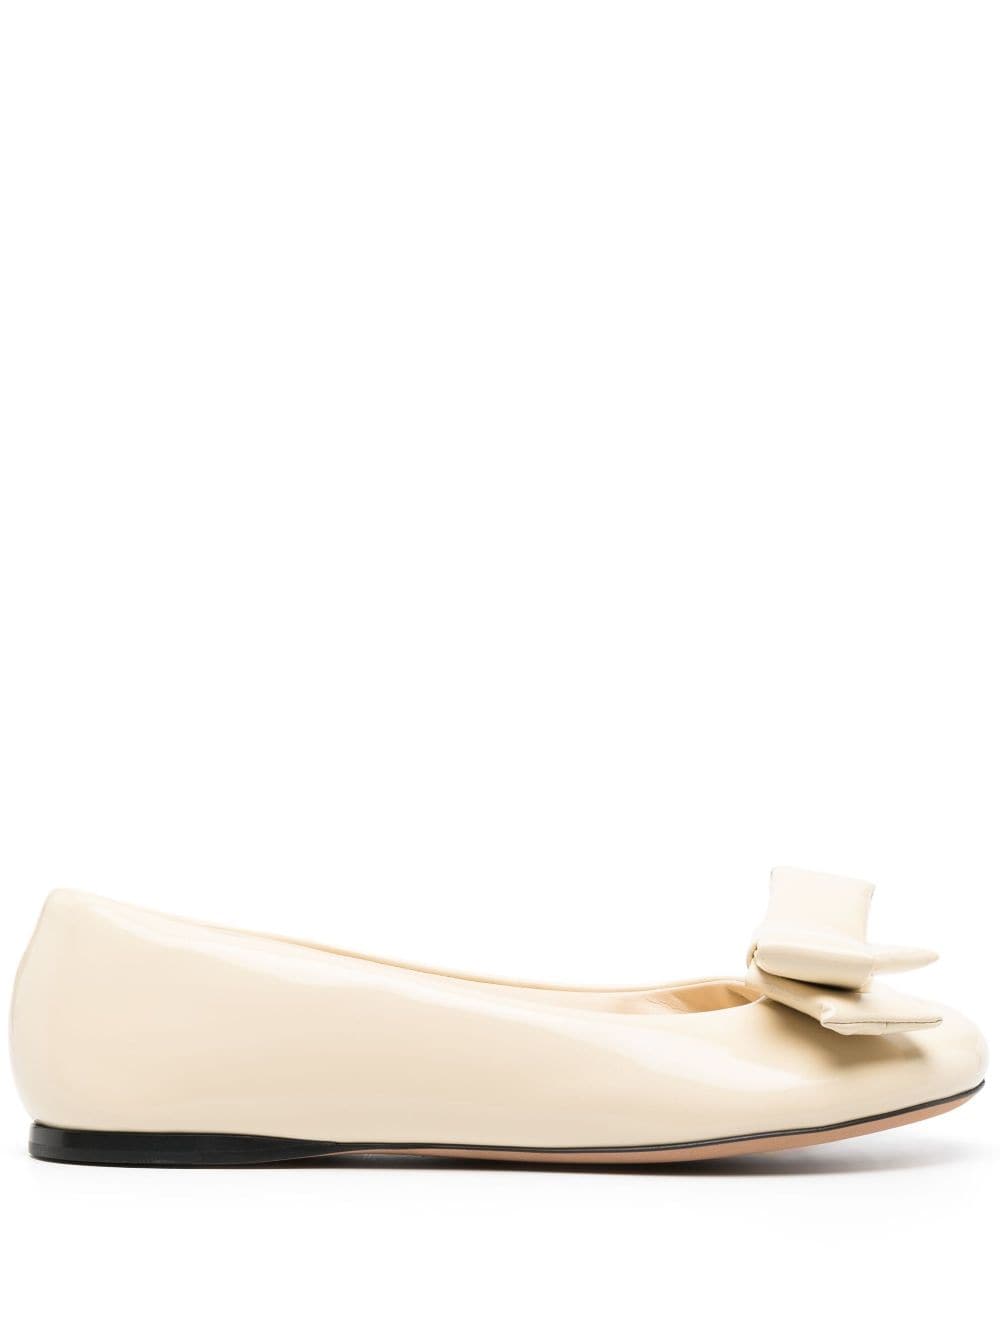 Loewe Puffy Leather Ballerina Shoes In White